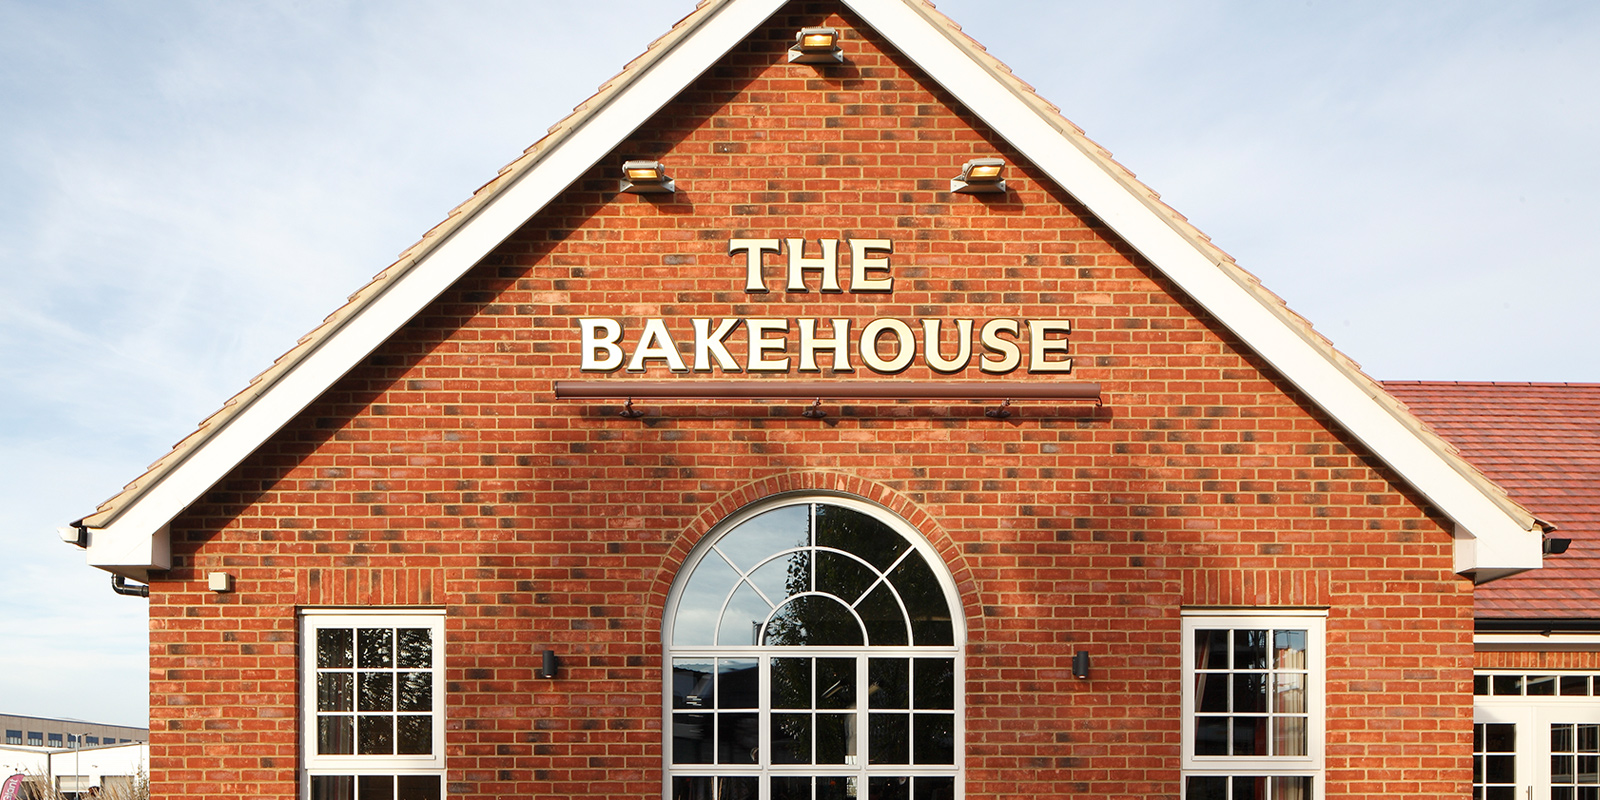 Architecture of Marston's Inns The Bakehouse